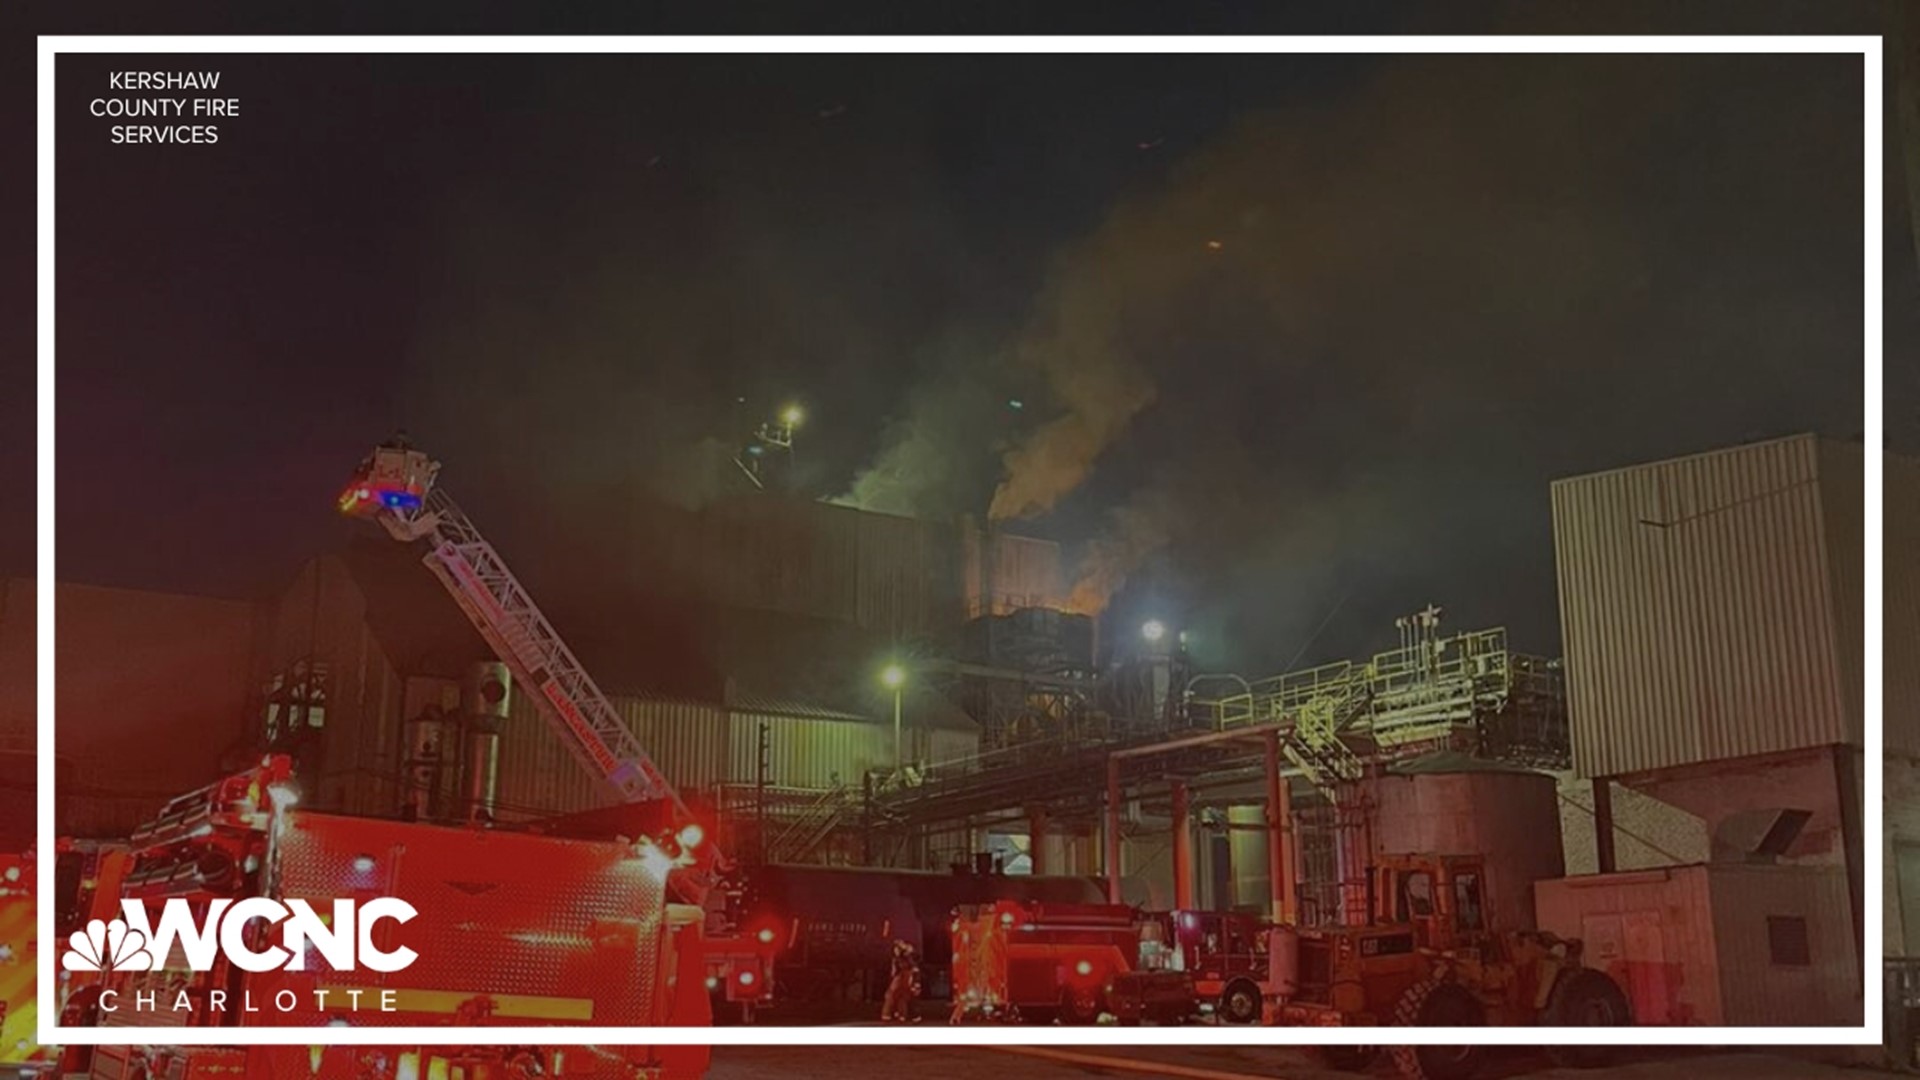 The fire happened Sunday at the Archer Daniels Midland factory in Kershaw.